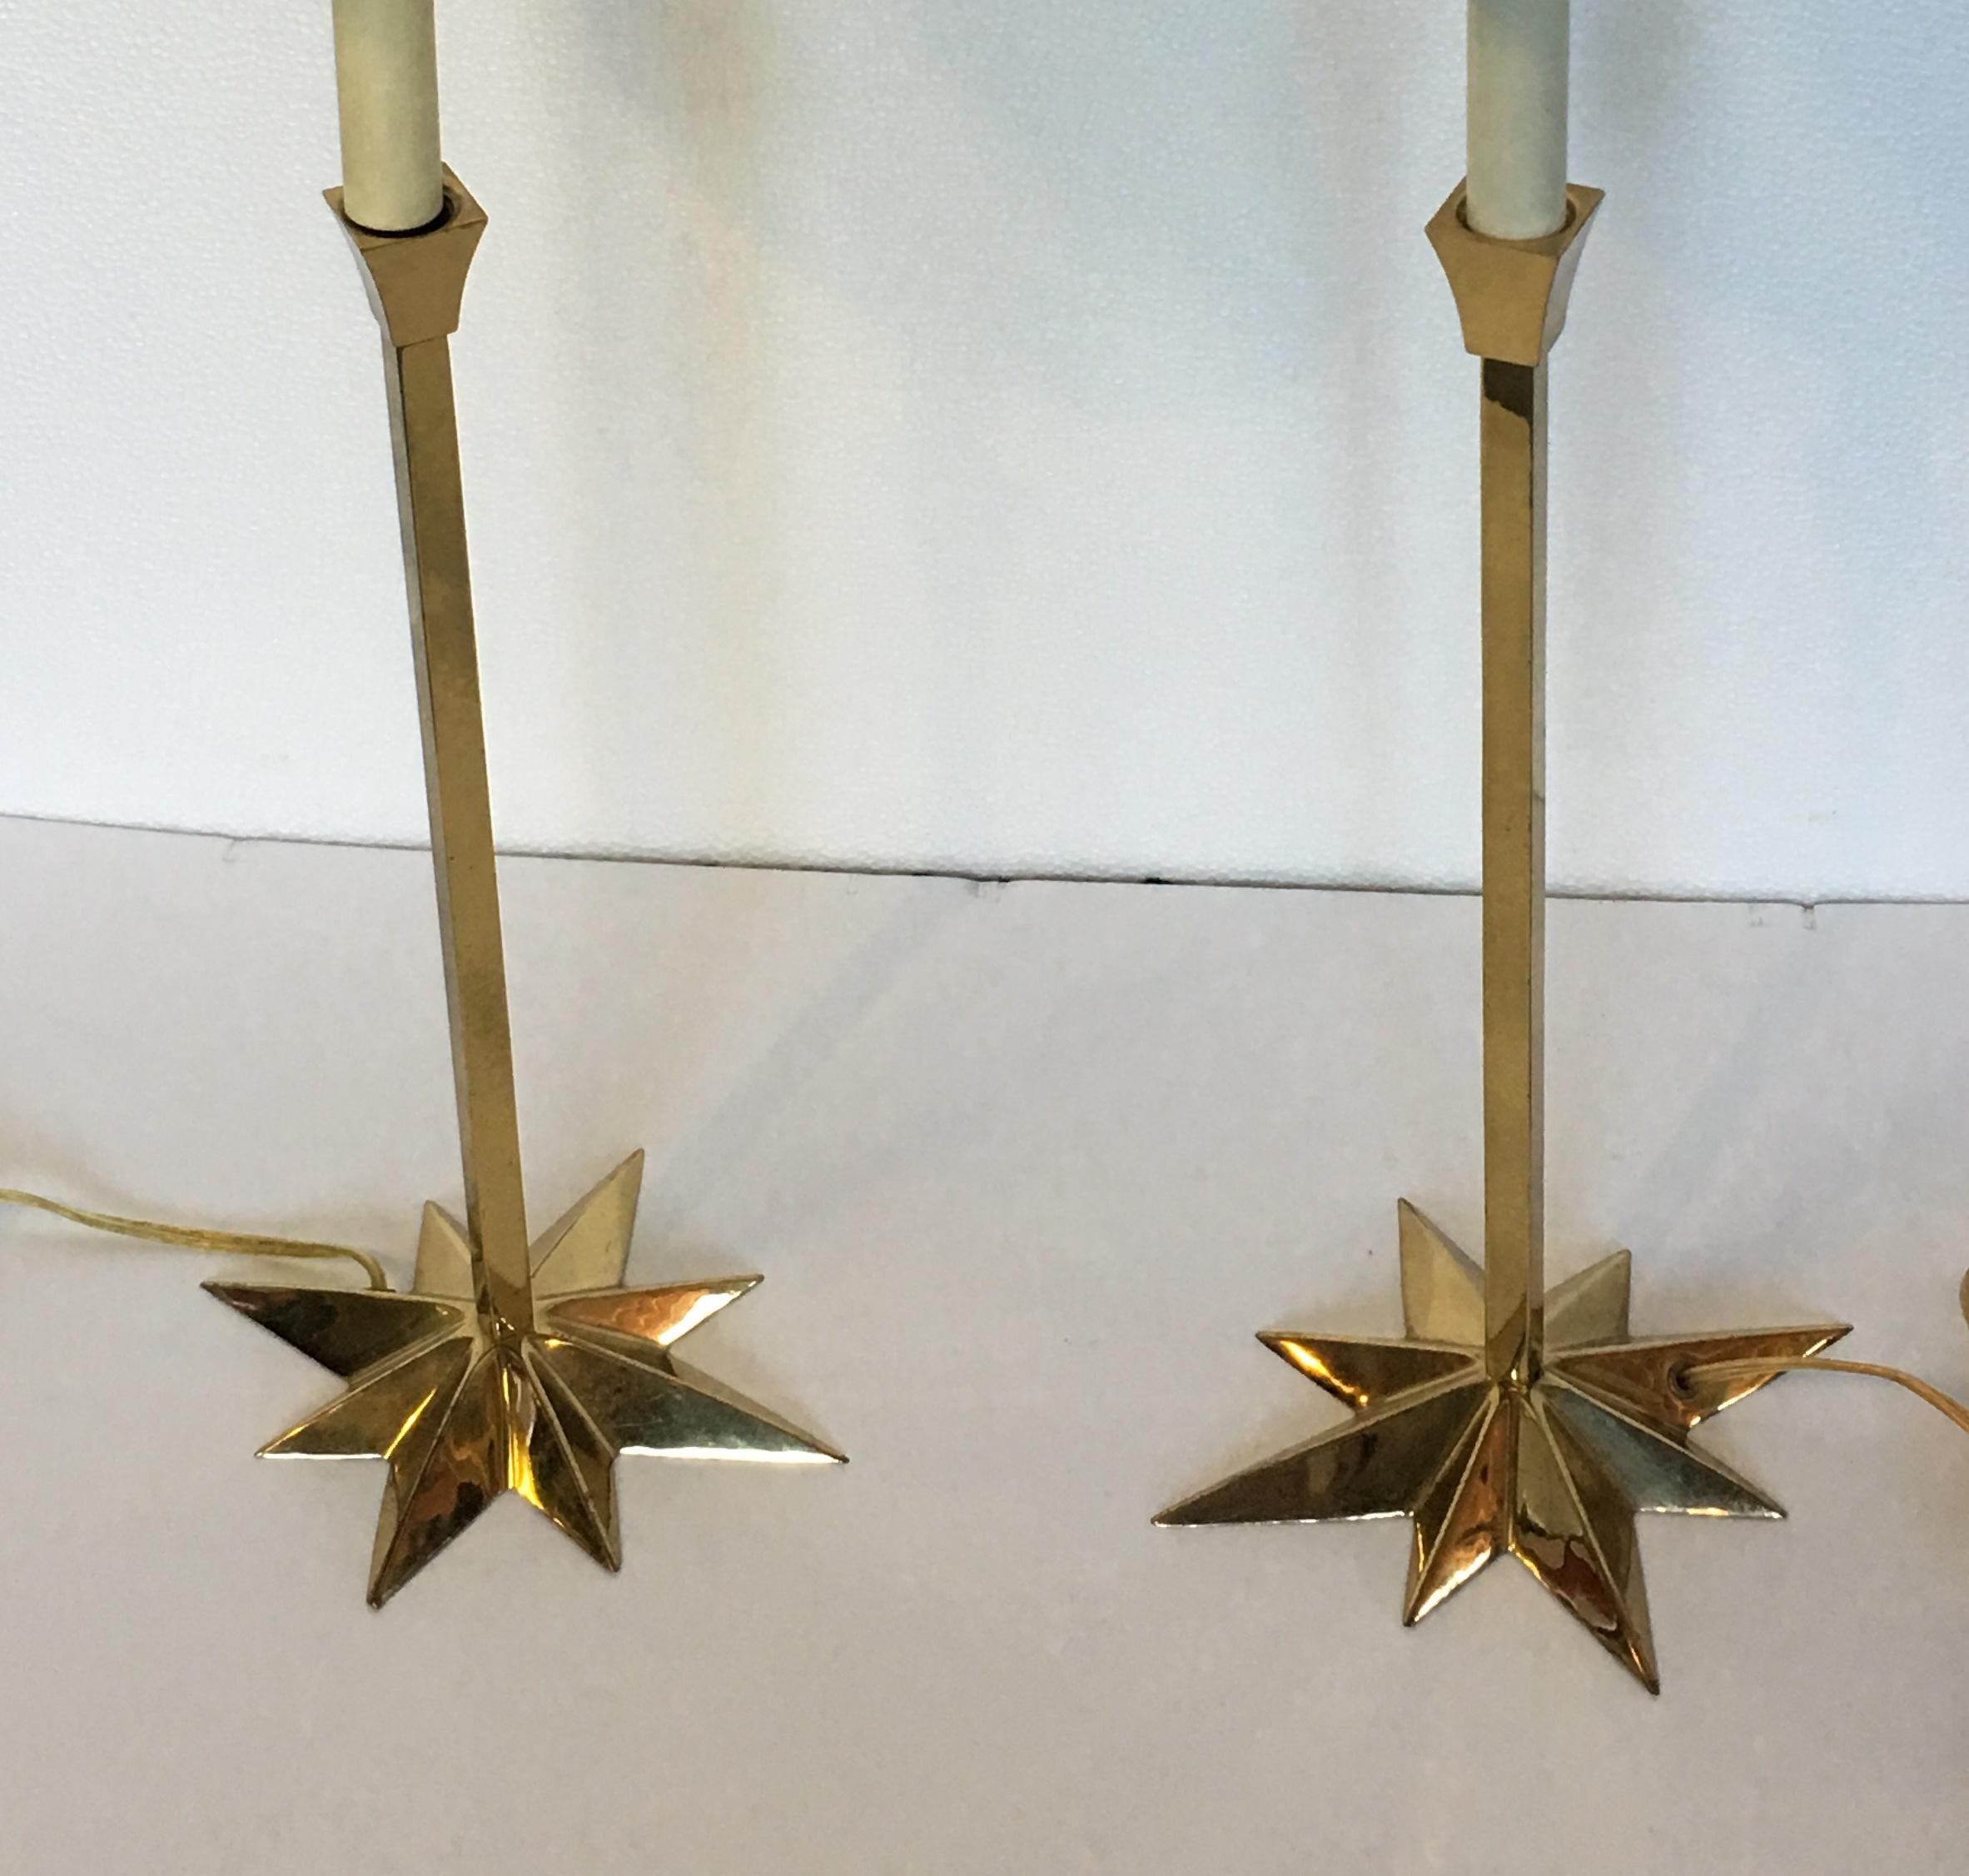 Pair of elegant brass candlestick style side lamps, with clip-on pleated linen shades. The base is brass in the shape of a star.
Measures: Base width is 6